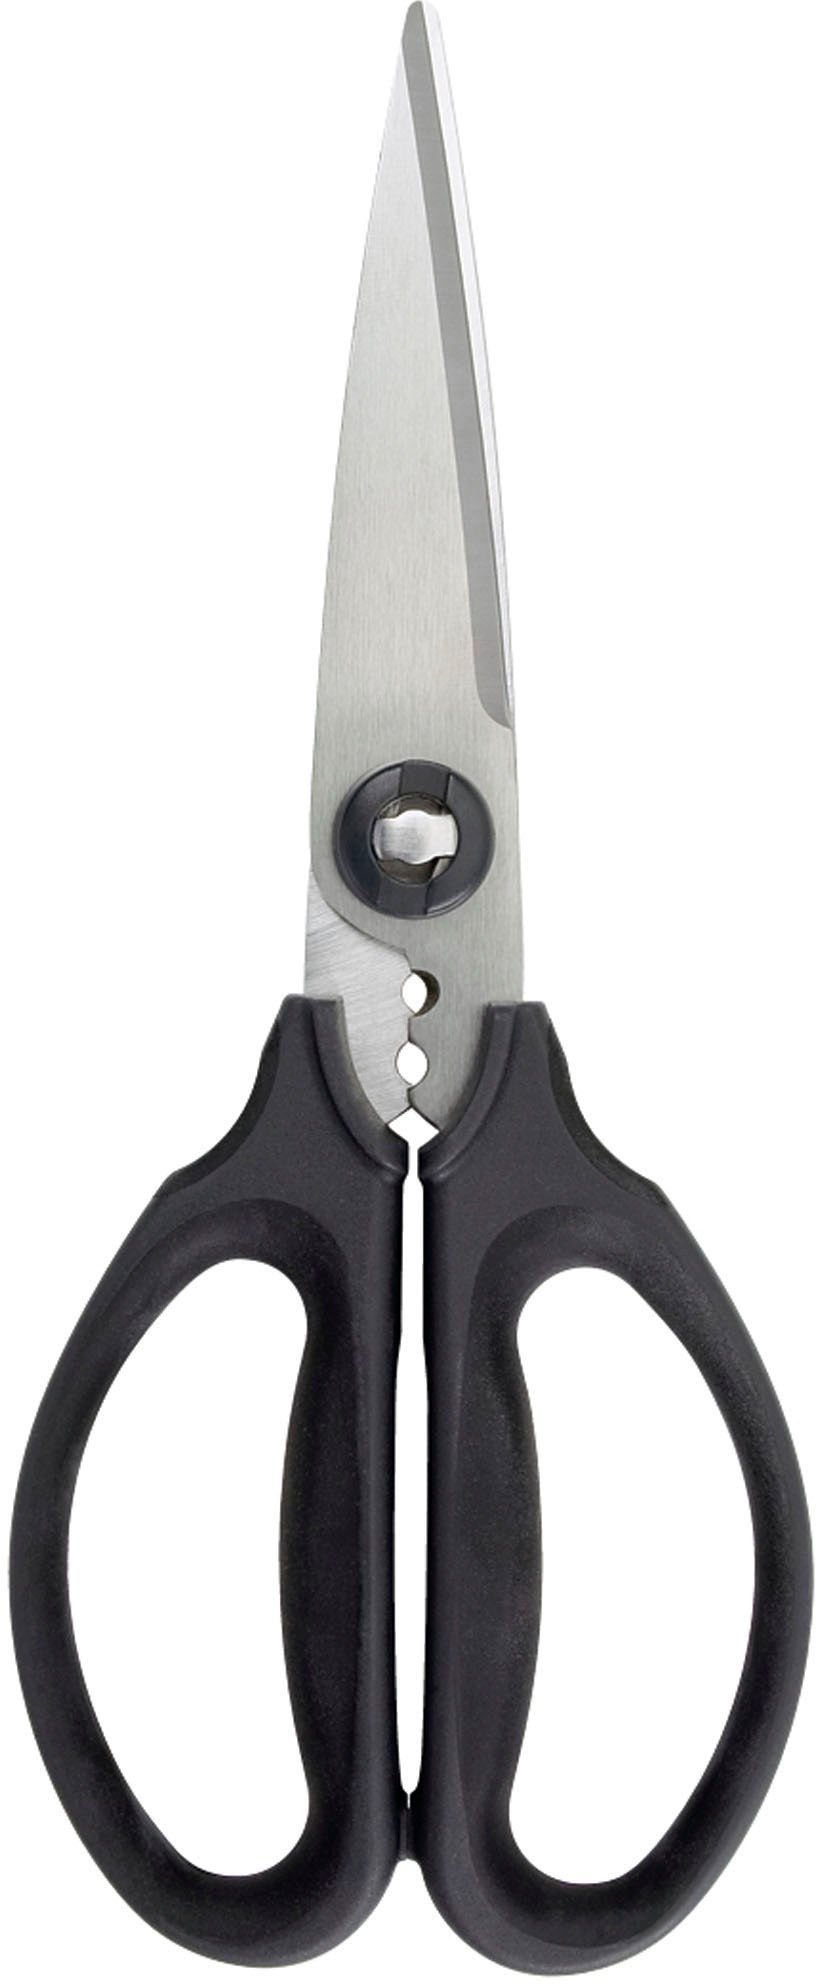 OXO Good Grips Kitchen and Herb Scissors